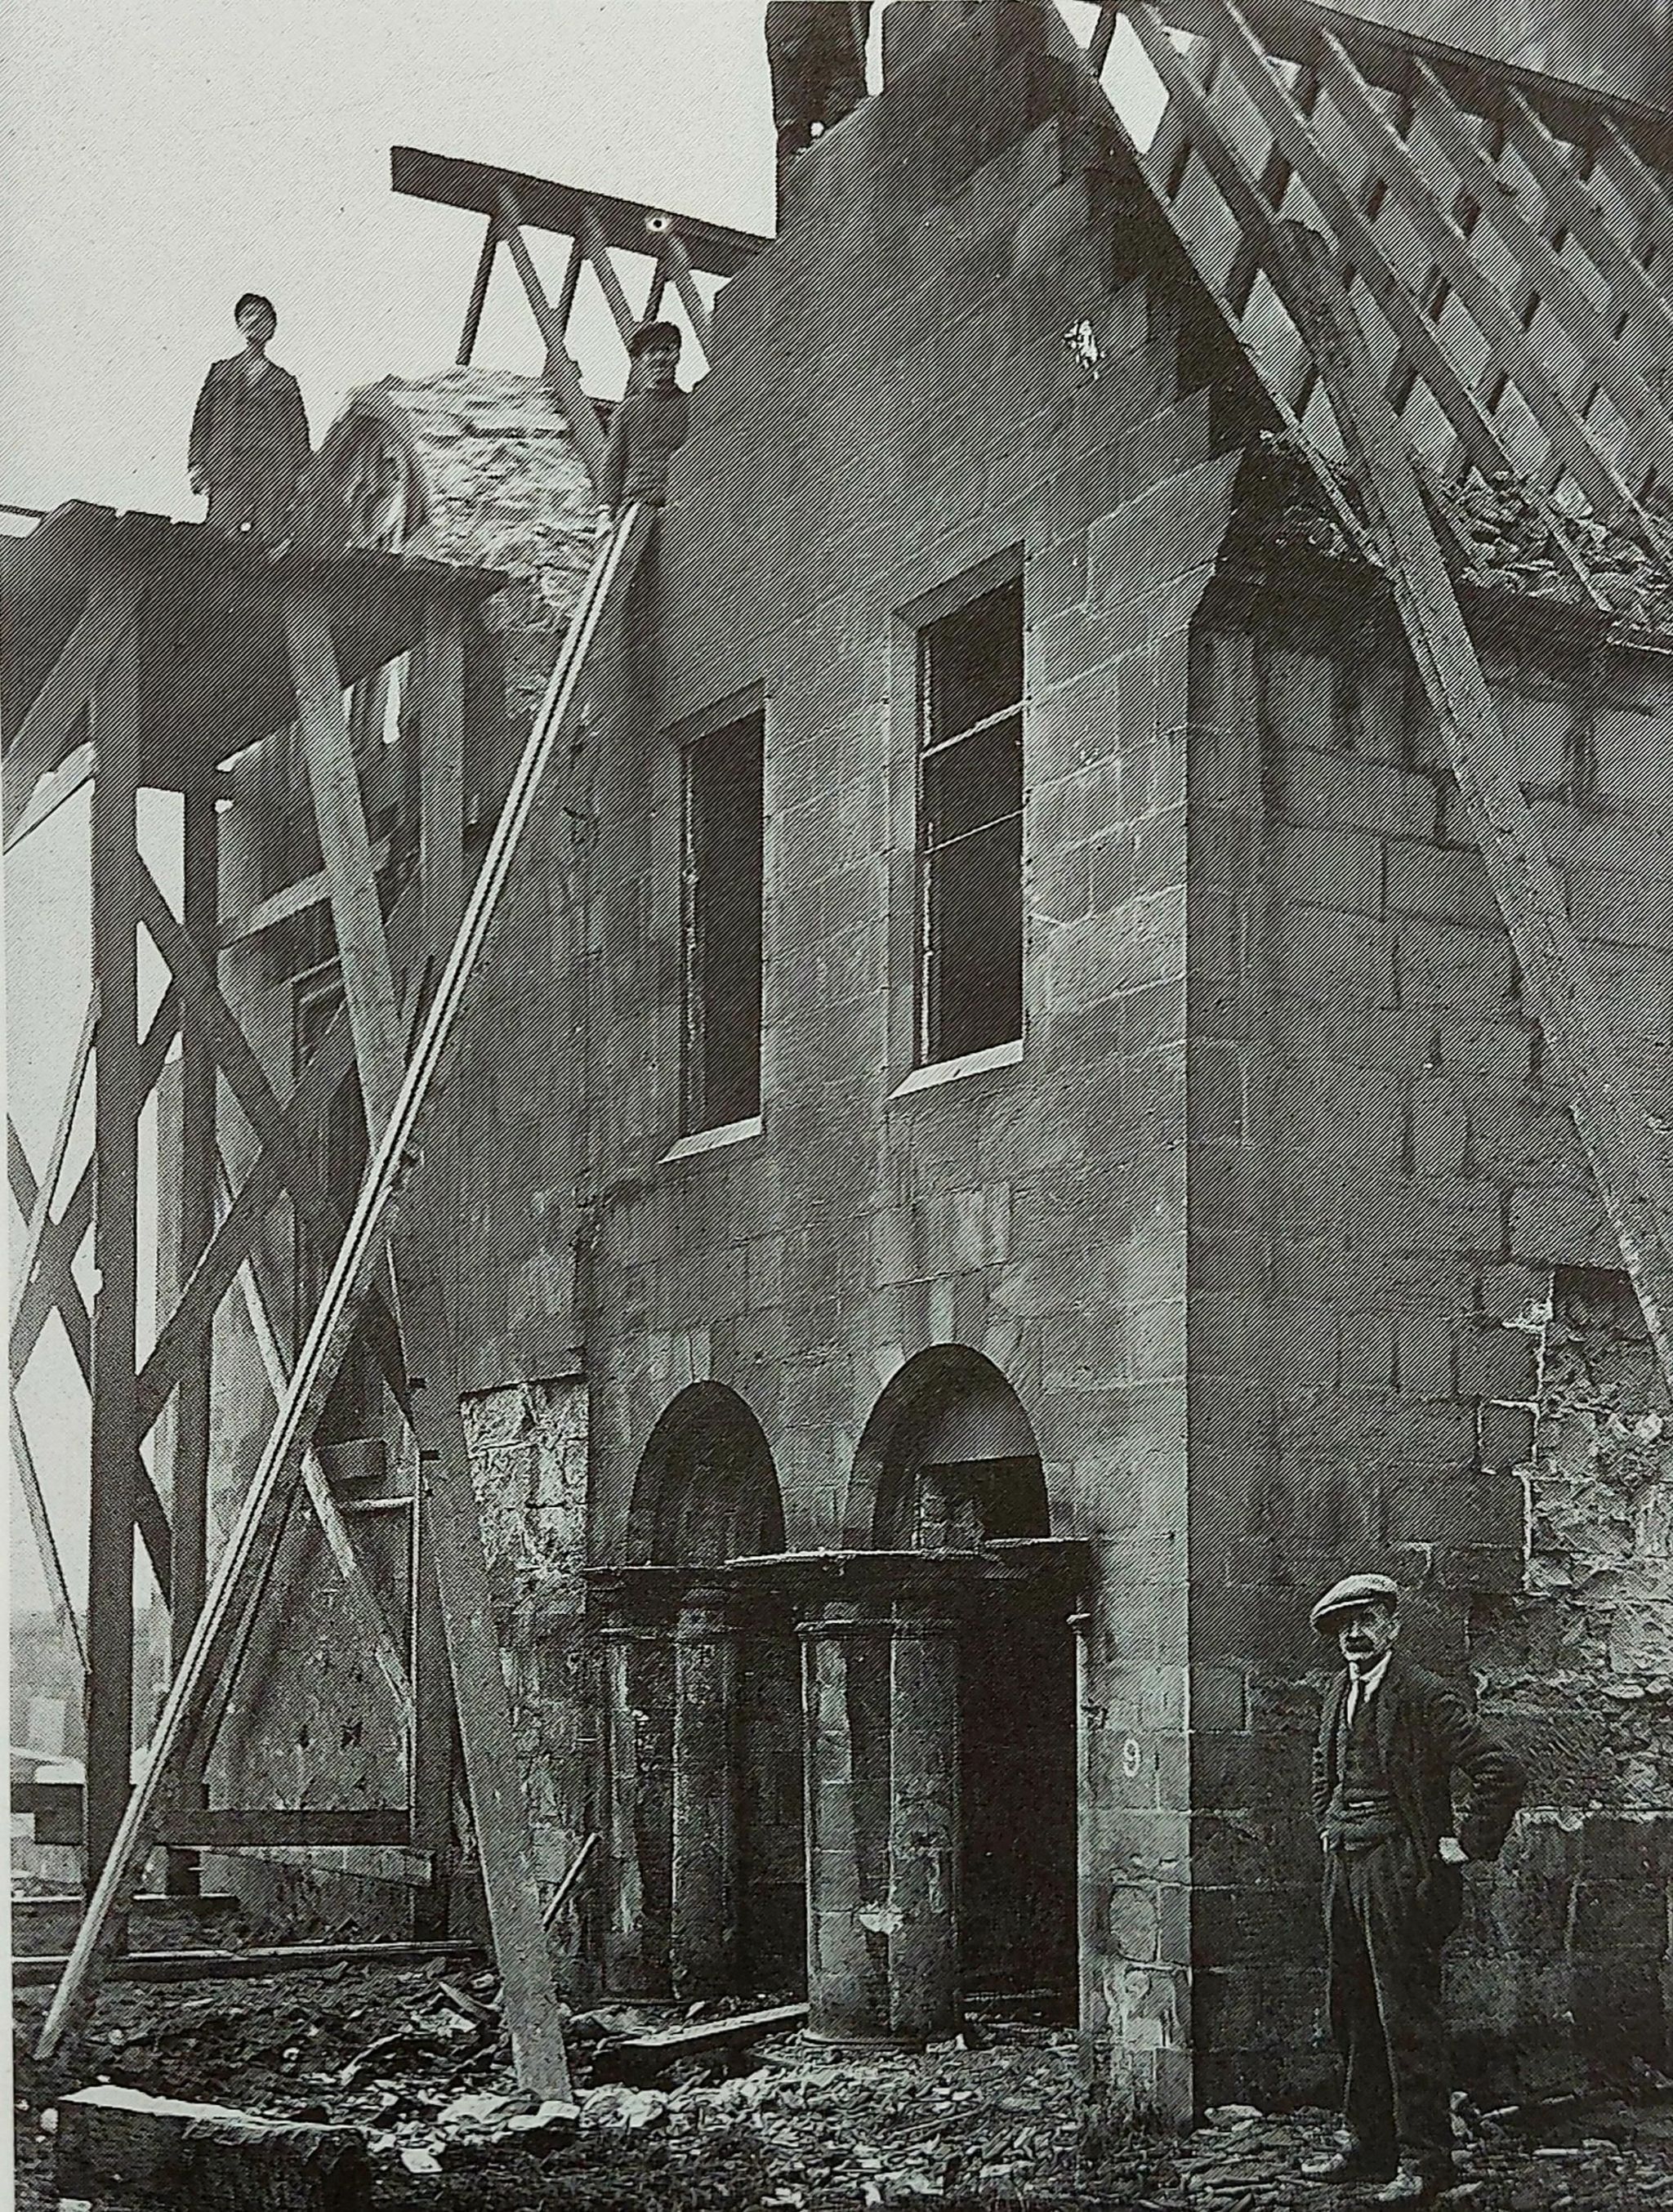 Old West Kirk during deconstruction in the 1920s, missing a roof with workers standing observing